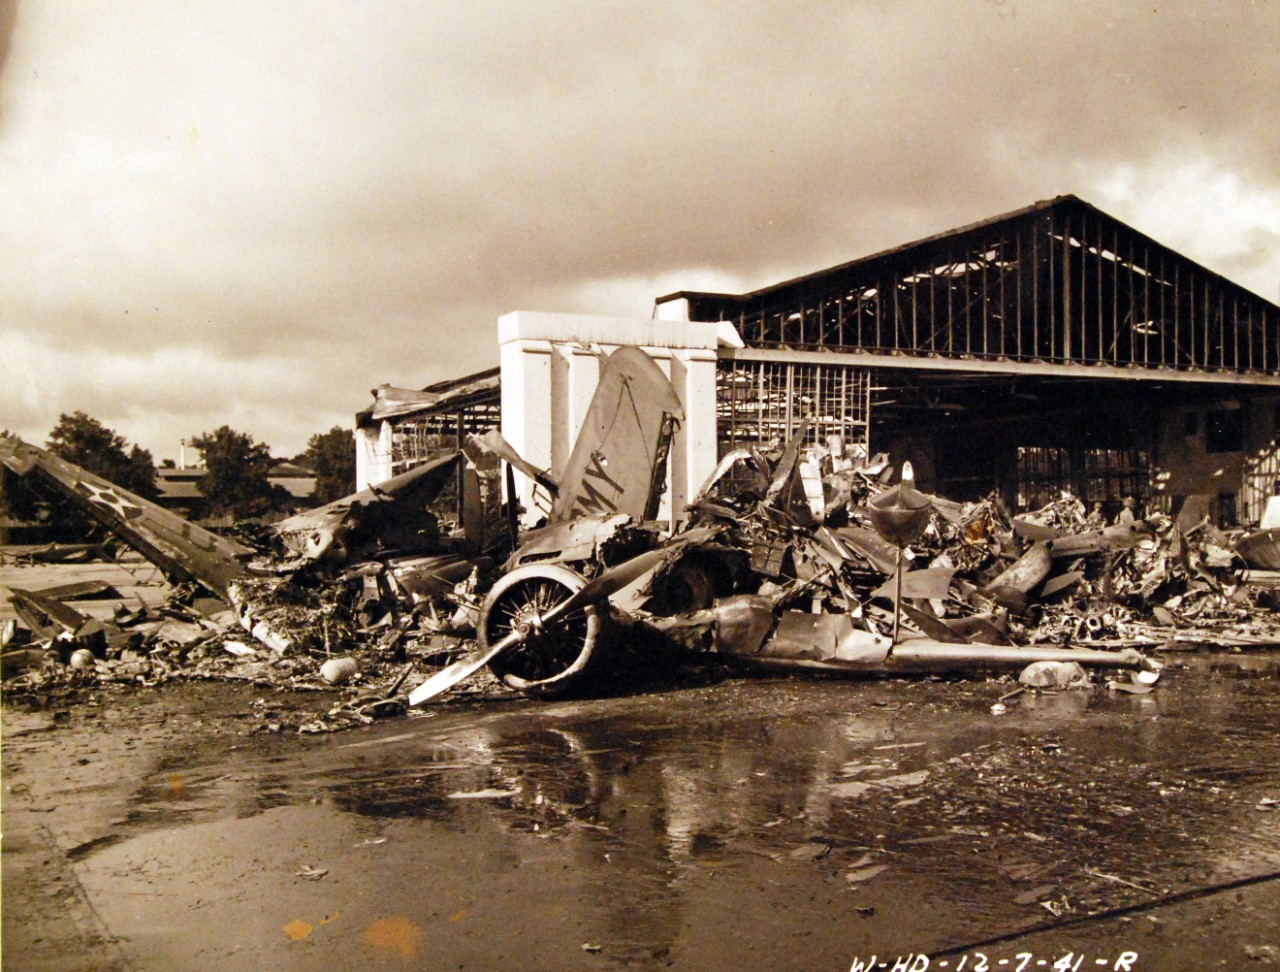 <p>80-G-32896: Japanese Attack on Pearl Harbor, December 7, 1941. Wheeler Field. U.S. aircraft destroyed as a result of the Japanese bombing. The heap of demolished planes wrecked with hangar in the background. An Army Amphibian is in the foreground.&nbsp;</p>
